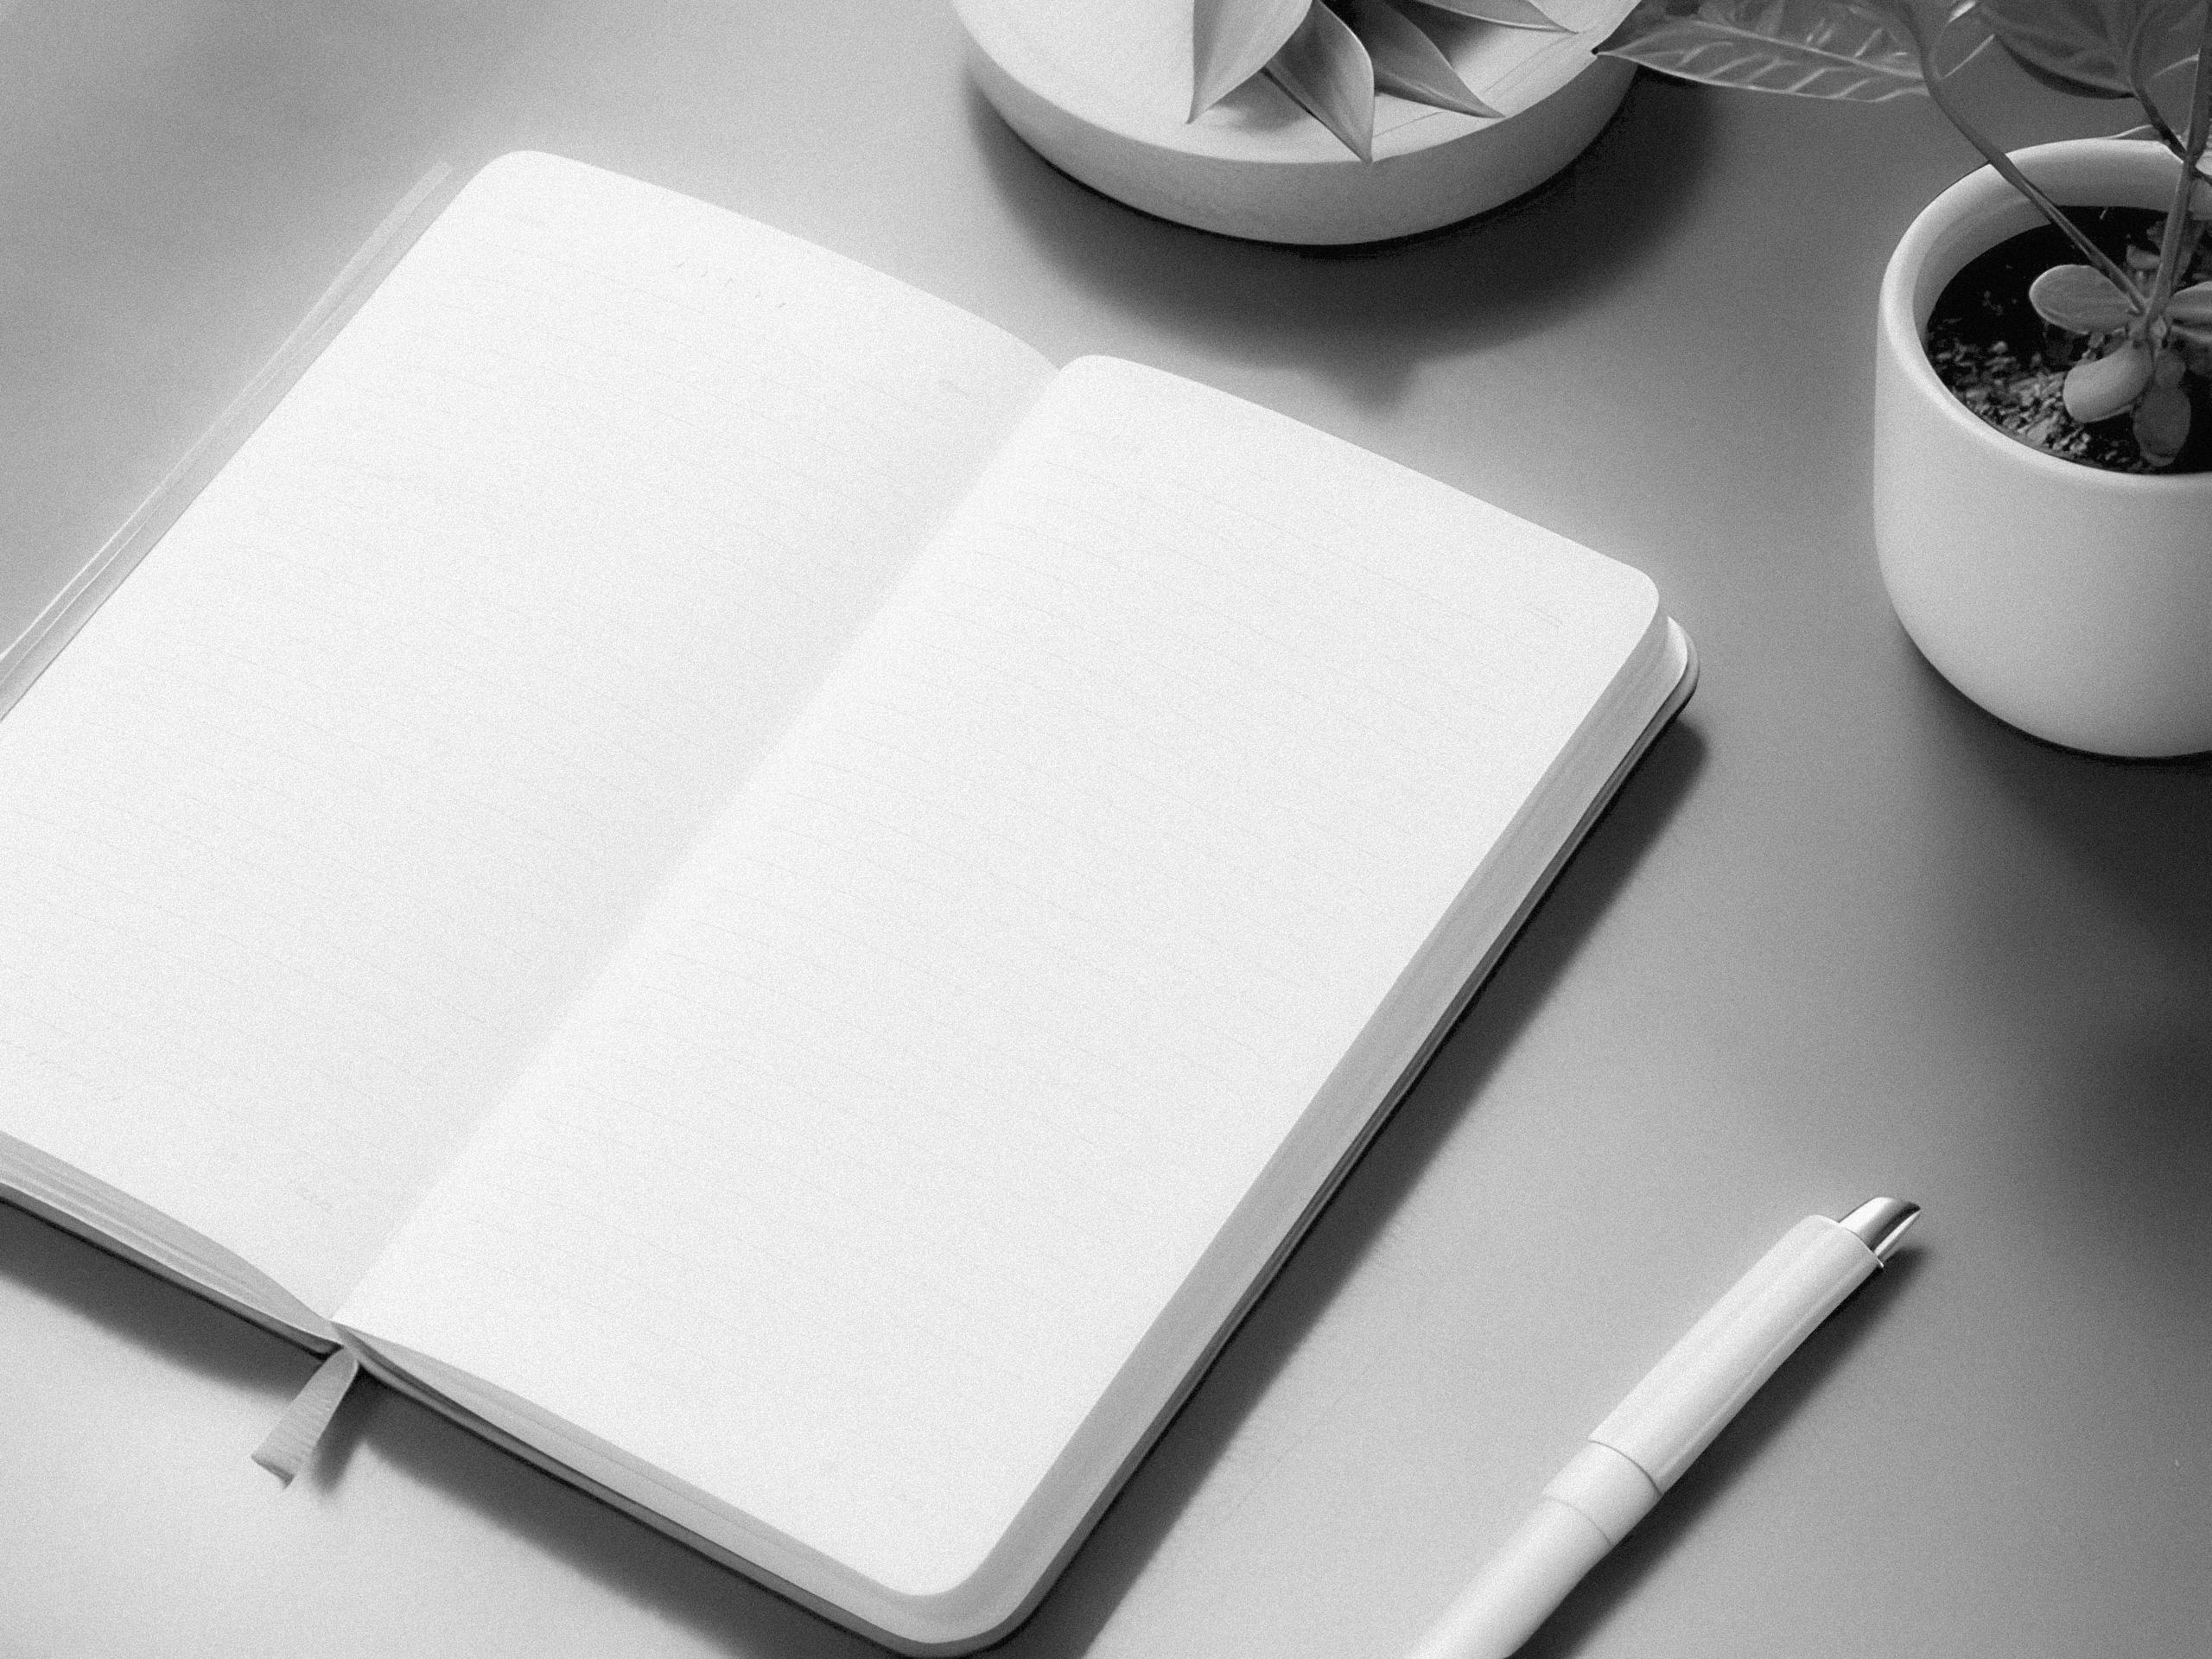 Download free image of Blank plain white notebook page with a pen